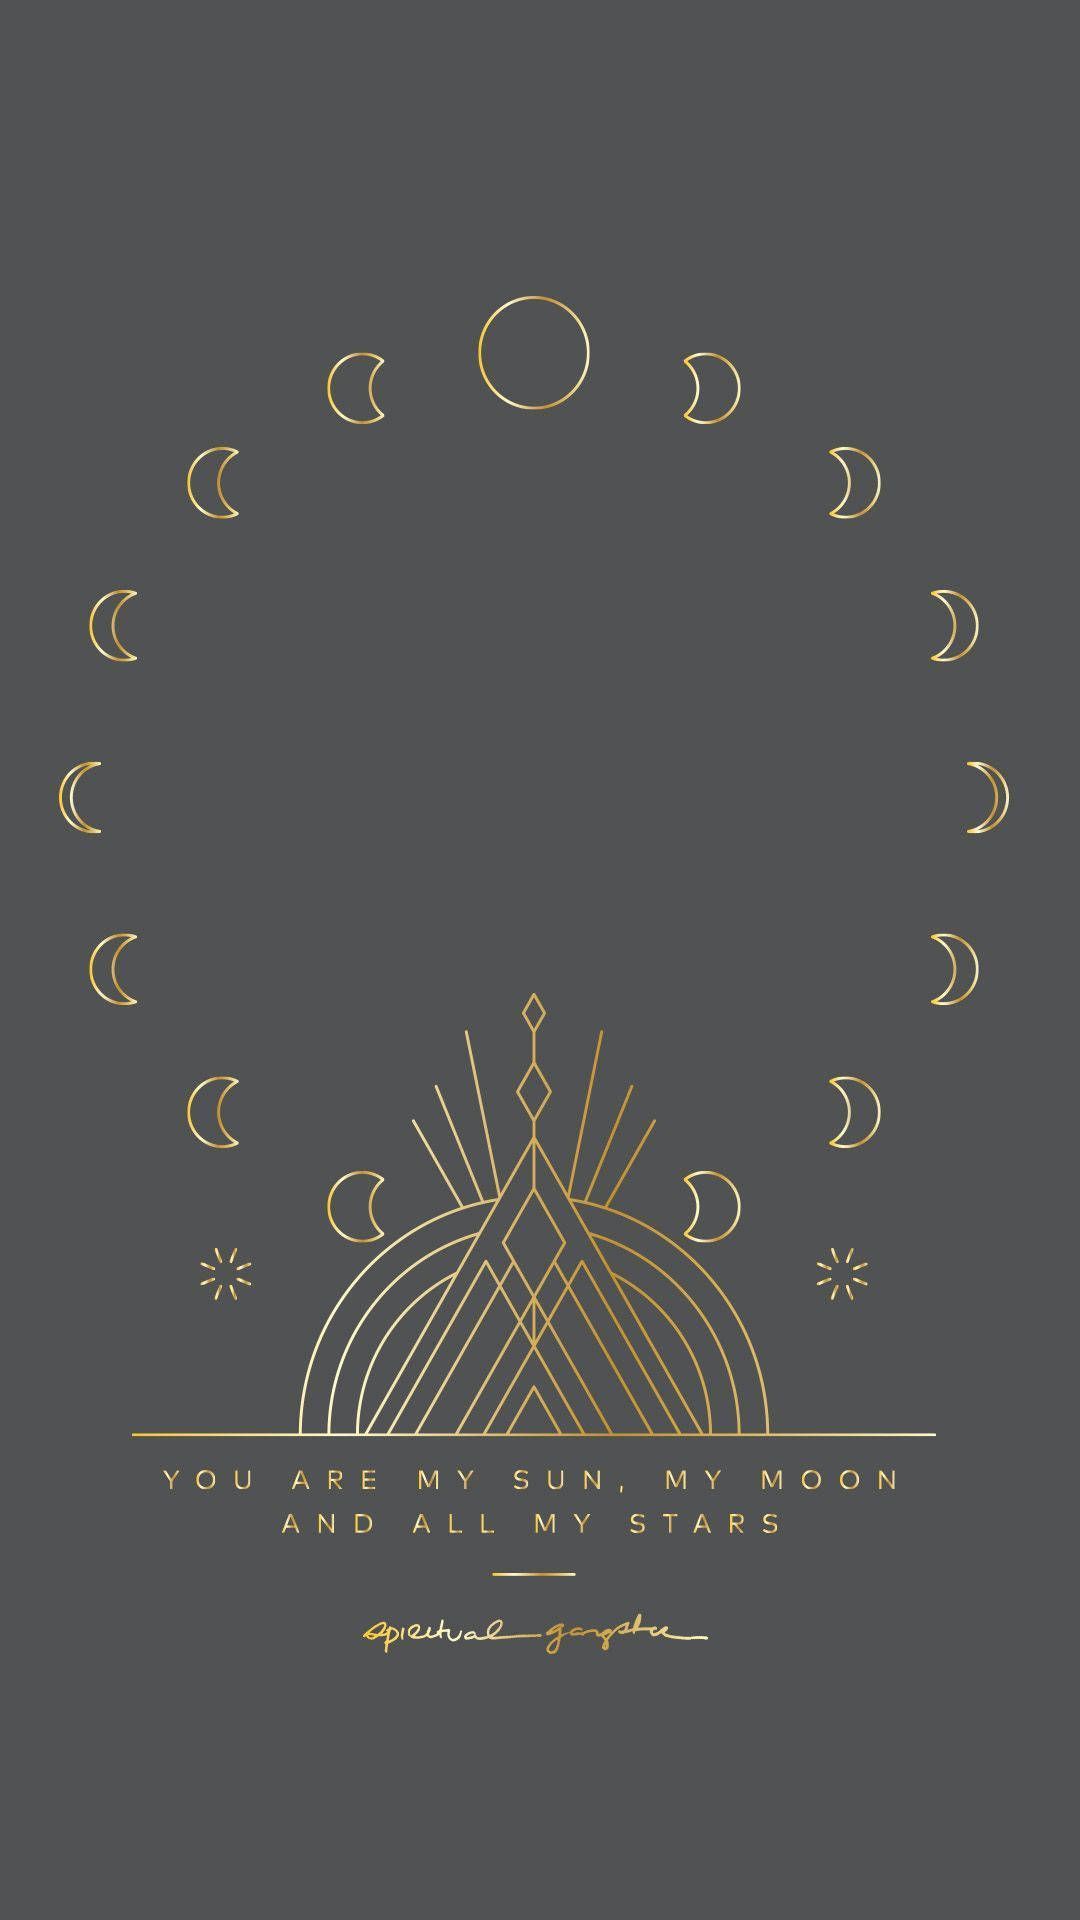 The moon and stars on a black background with gold text - Spiritual